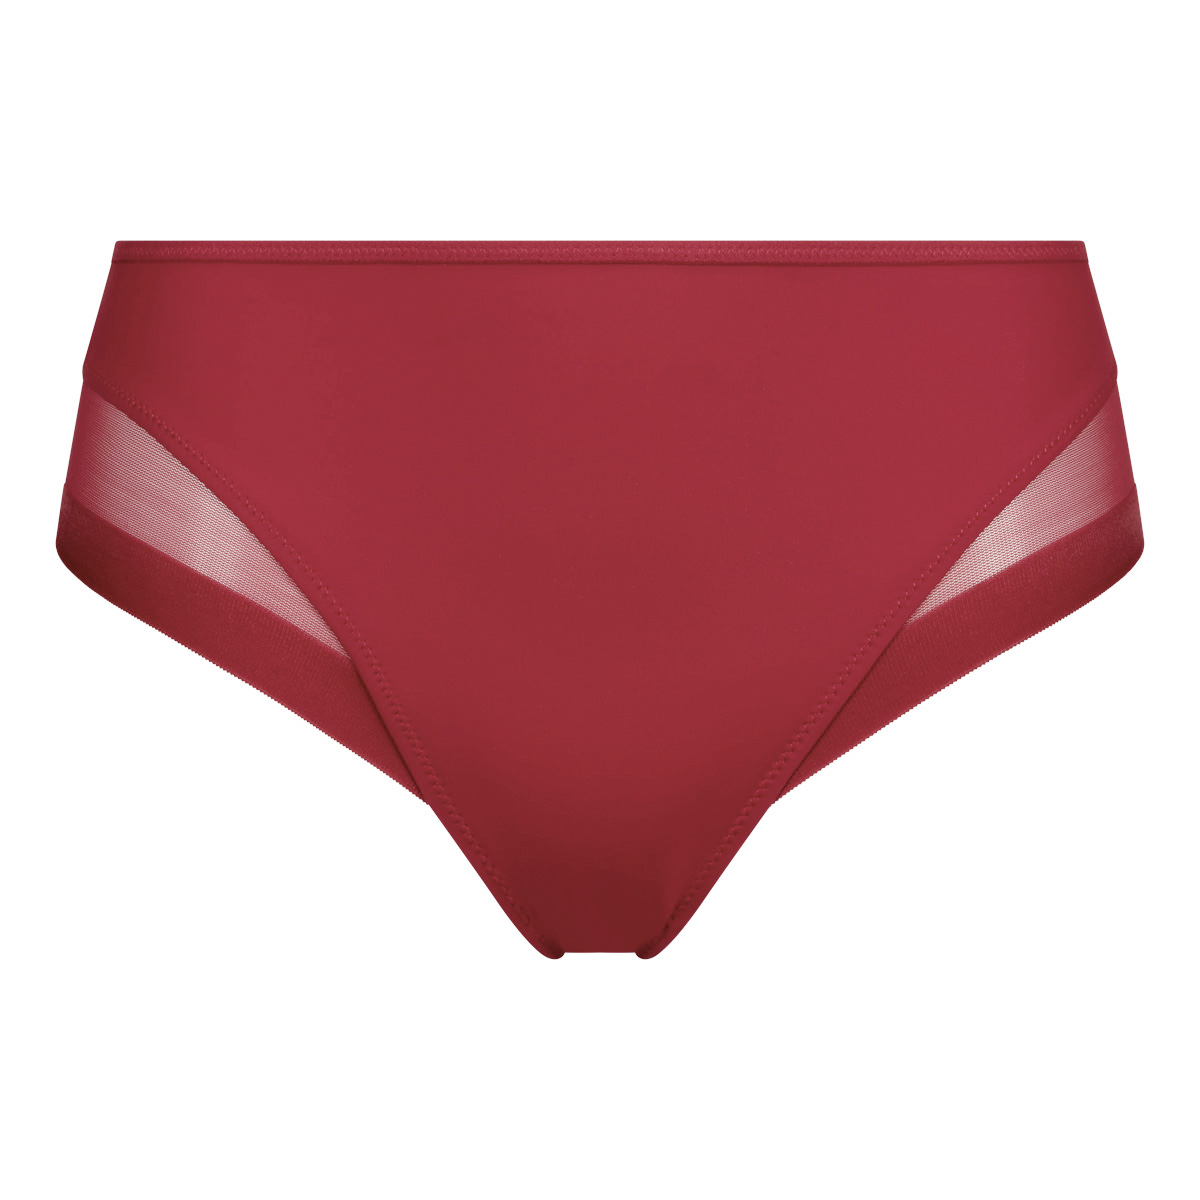 Generous Bordeaux Women's knickers in microfibre and tulle